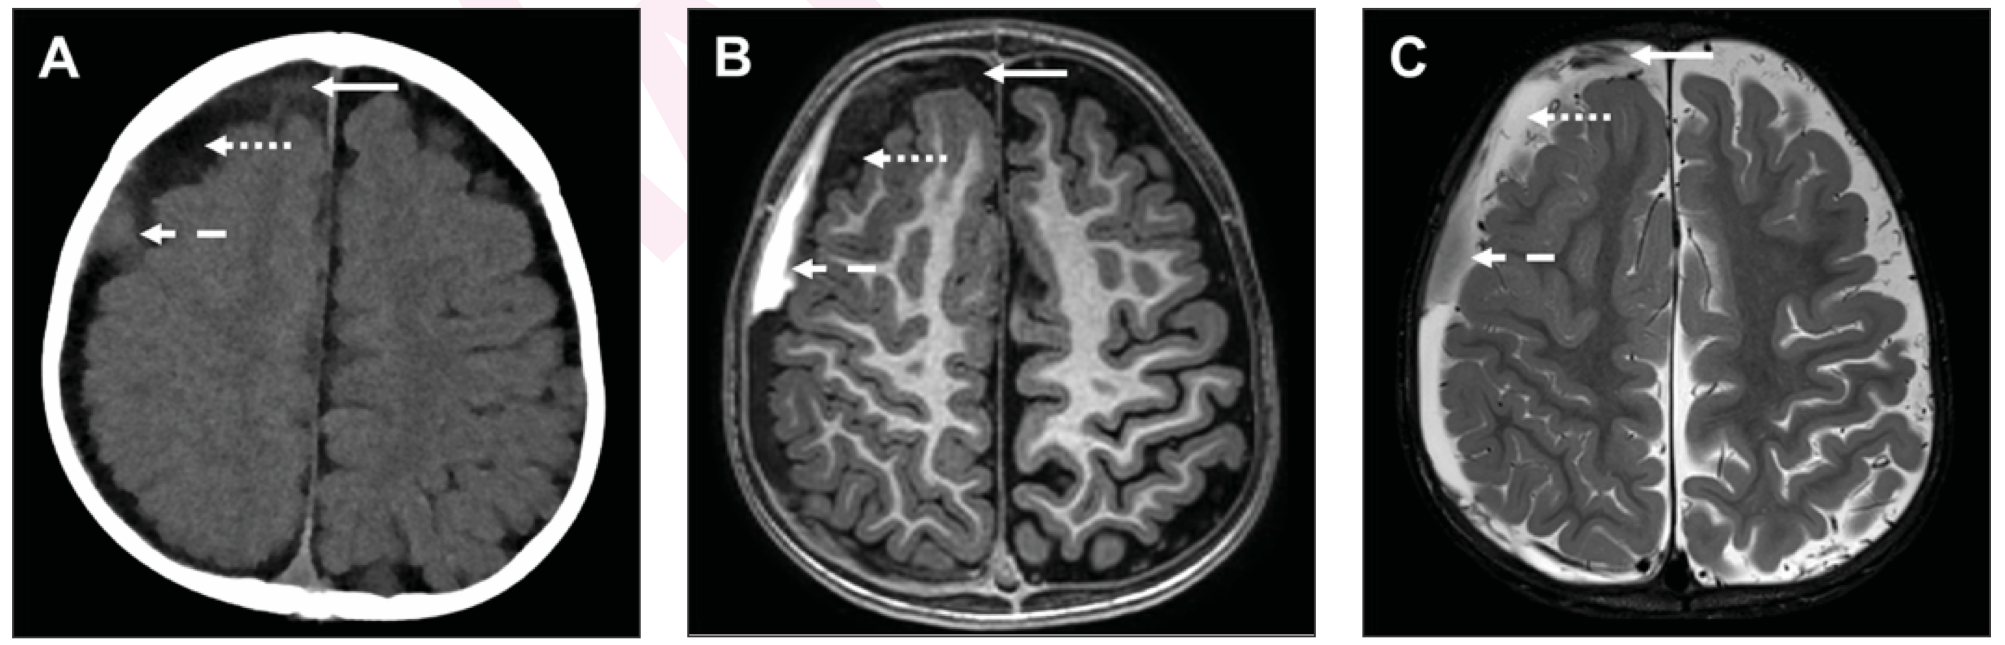 Neuroimaging of the brain in a 1-year-old boy found unresponsive. A) Axial unenhanced CT, B) T1-weighted MRI, and C) T2-weighted MRI demonstrate high-attenuation T1-hyperintense and T2-hypointense extra-axial products (dashed arrow) suggestive of evolving hemorrhage. The non-dependent products (solid arrow) show intermediate attenuation, T1 hypointensity, and T2 hypointensity. The central low-attenuation T1-hypointense and T2-hyperintense material (dotted arrow) suggests admixture of cerebrospinal fluid.

Credit: American Journal of Roentgenology